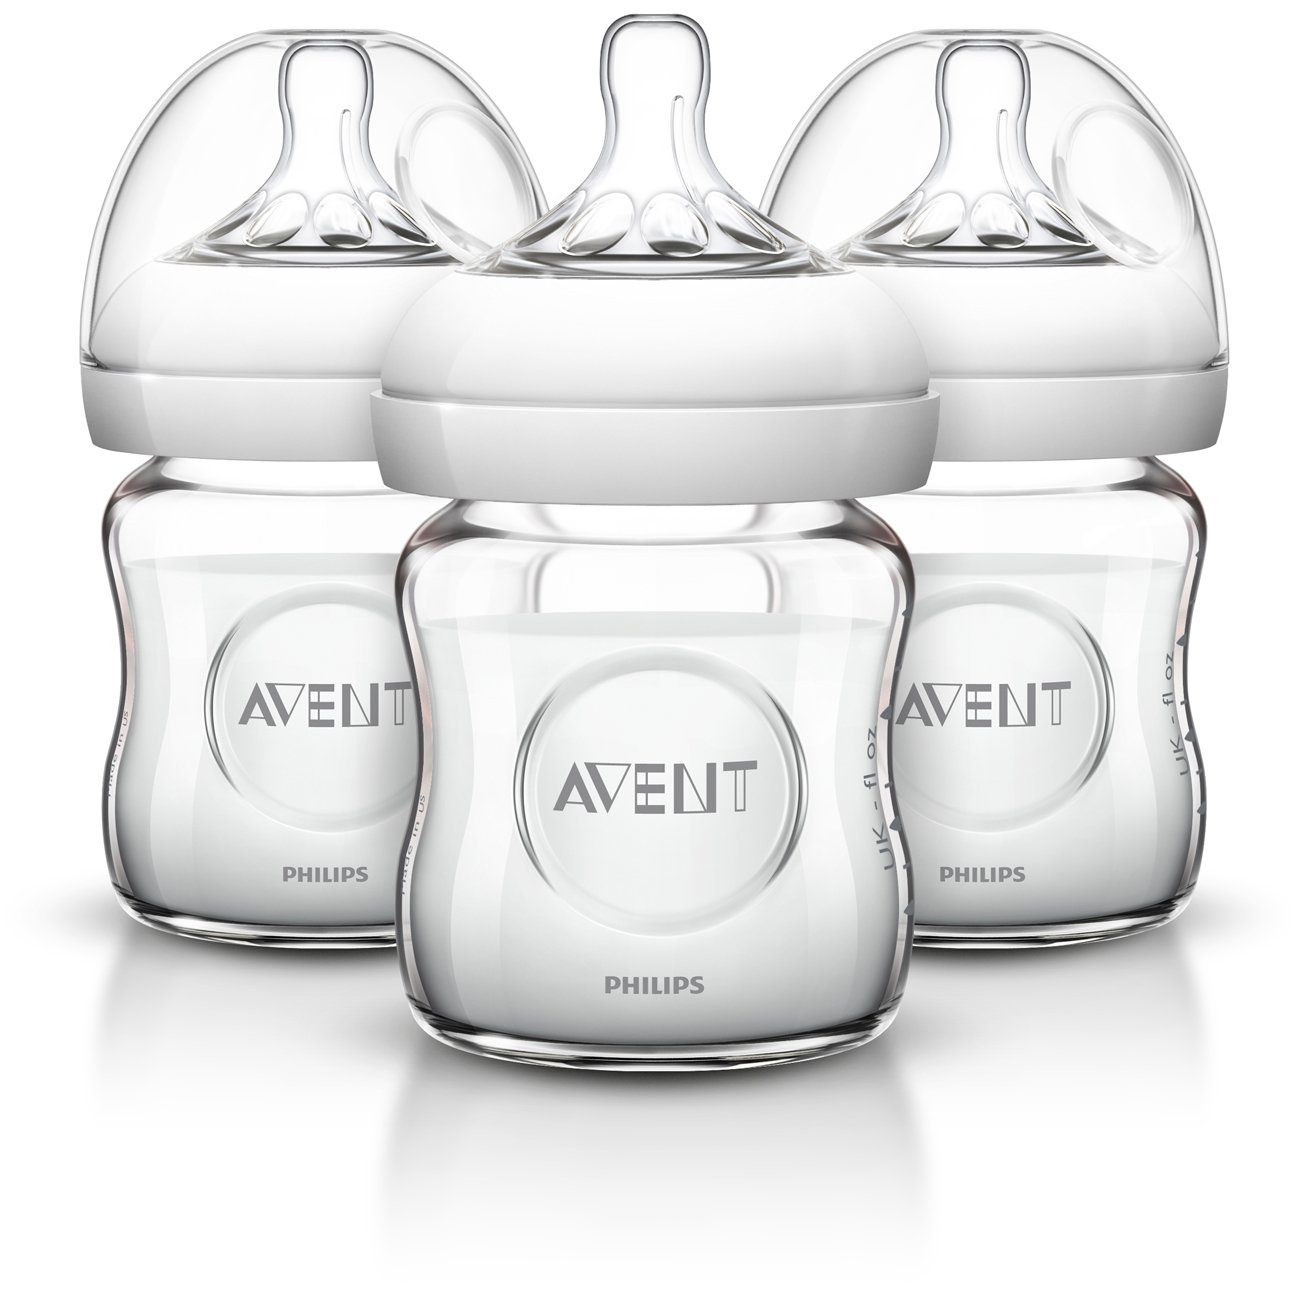 Top 4 Best Natural Baby Bottles Reviews in 2022 2